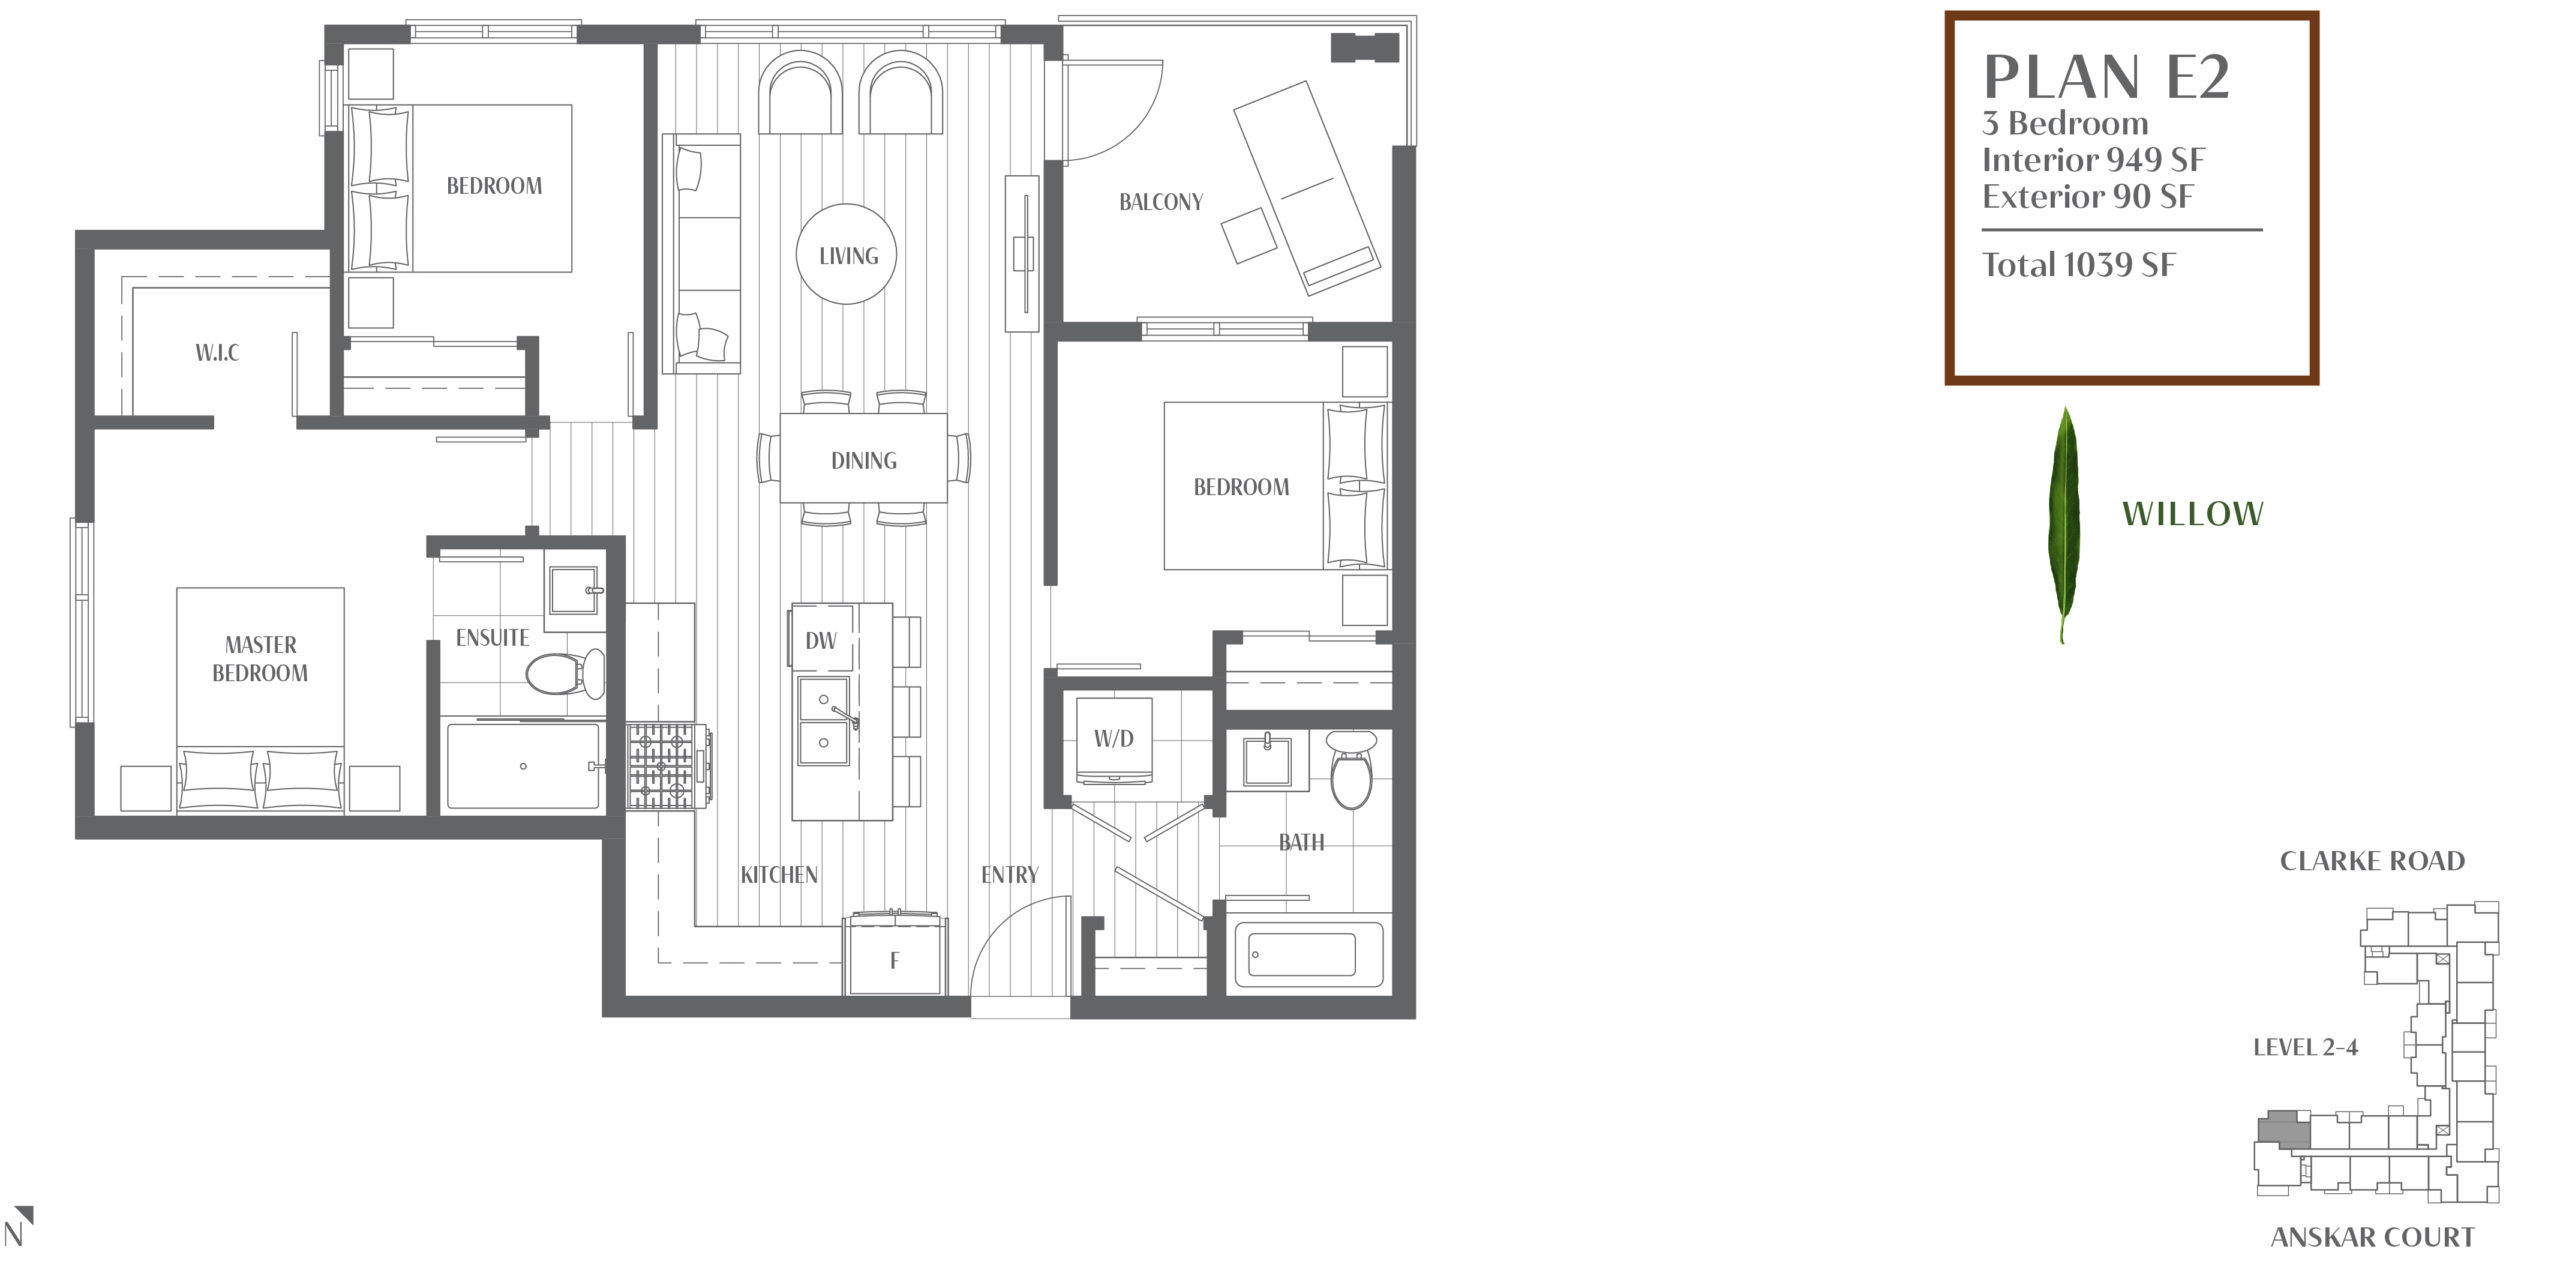  Floor Plan of The Oaks Phase 3 (Willow) Condos with undefined beds